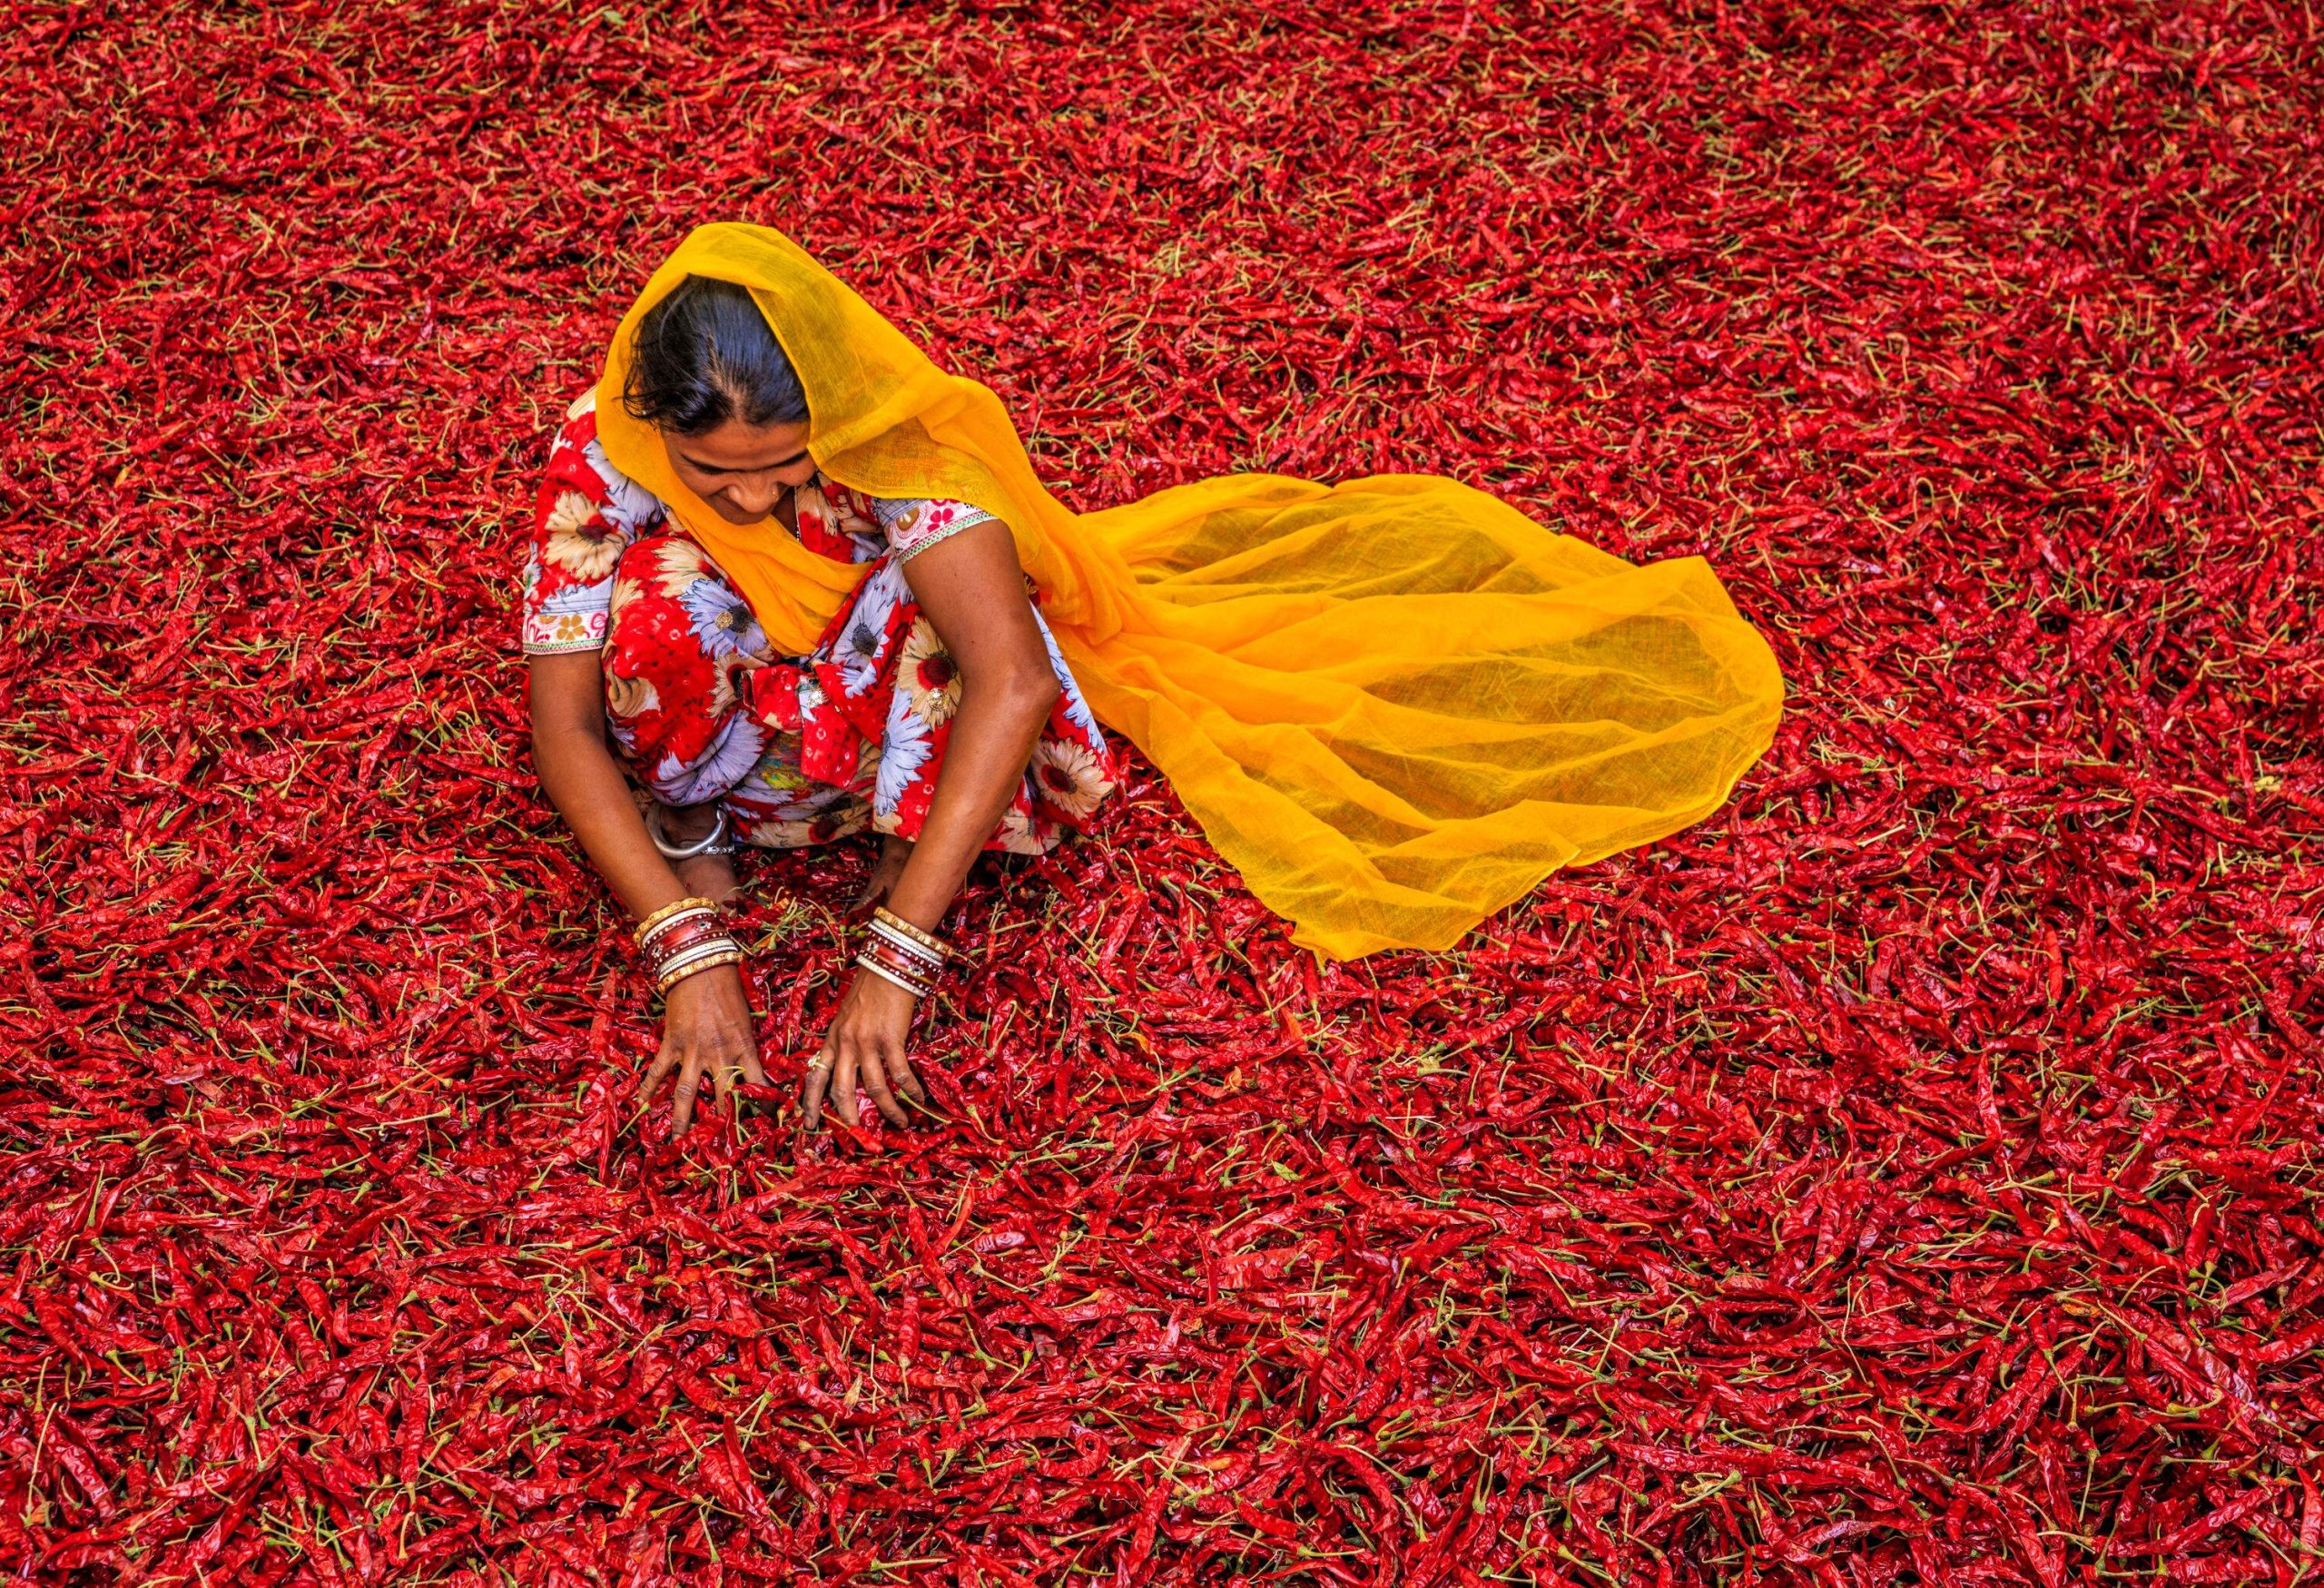 A woman with a yellow headscarf sitting on a bed of red chilli peppers.